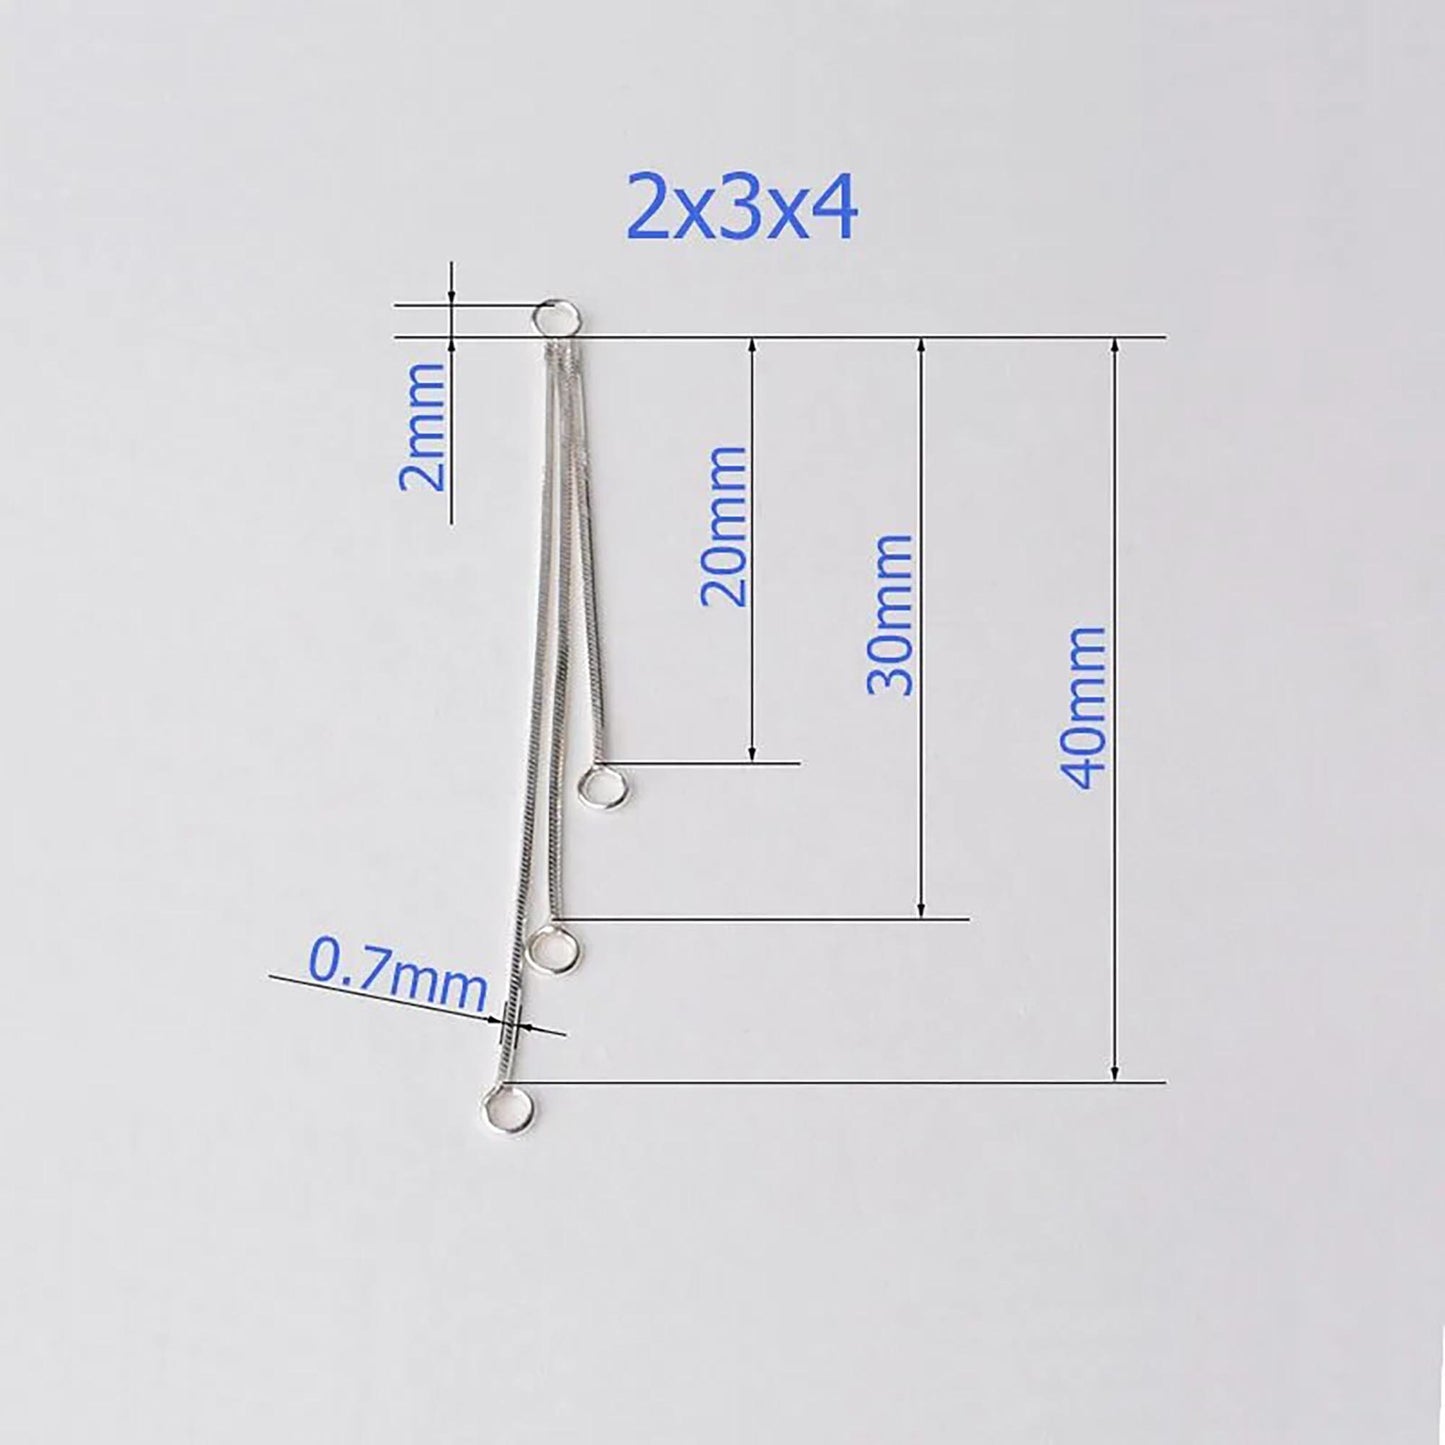 Sterling Silver Earring Findings: Components for DIY Link Earring, 3-Strand Tassel, and Thread Earring Making